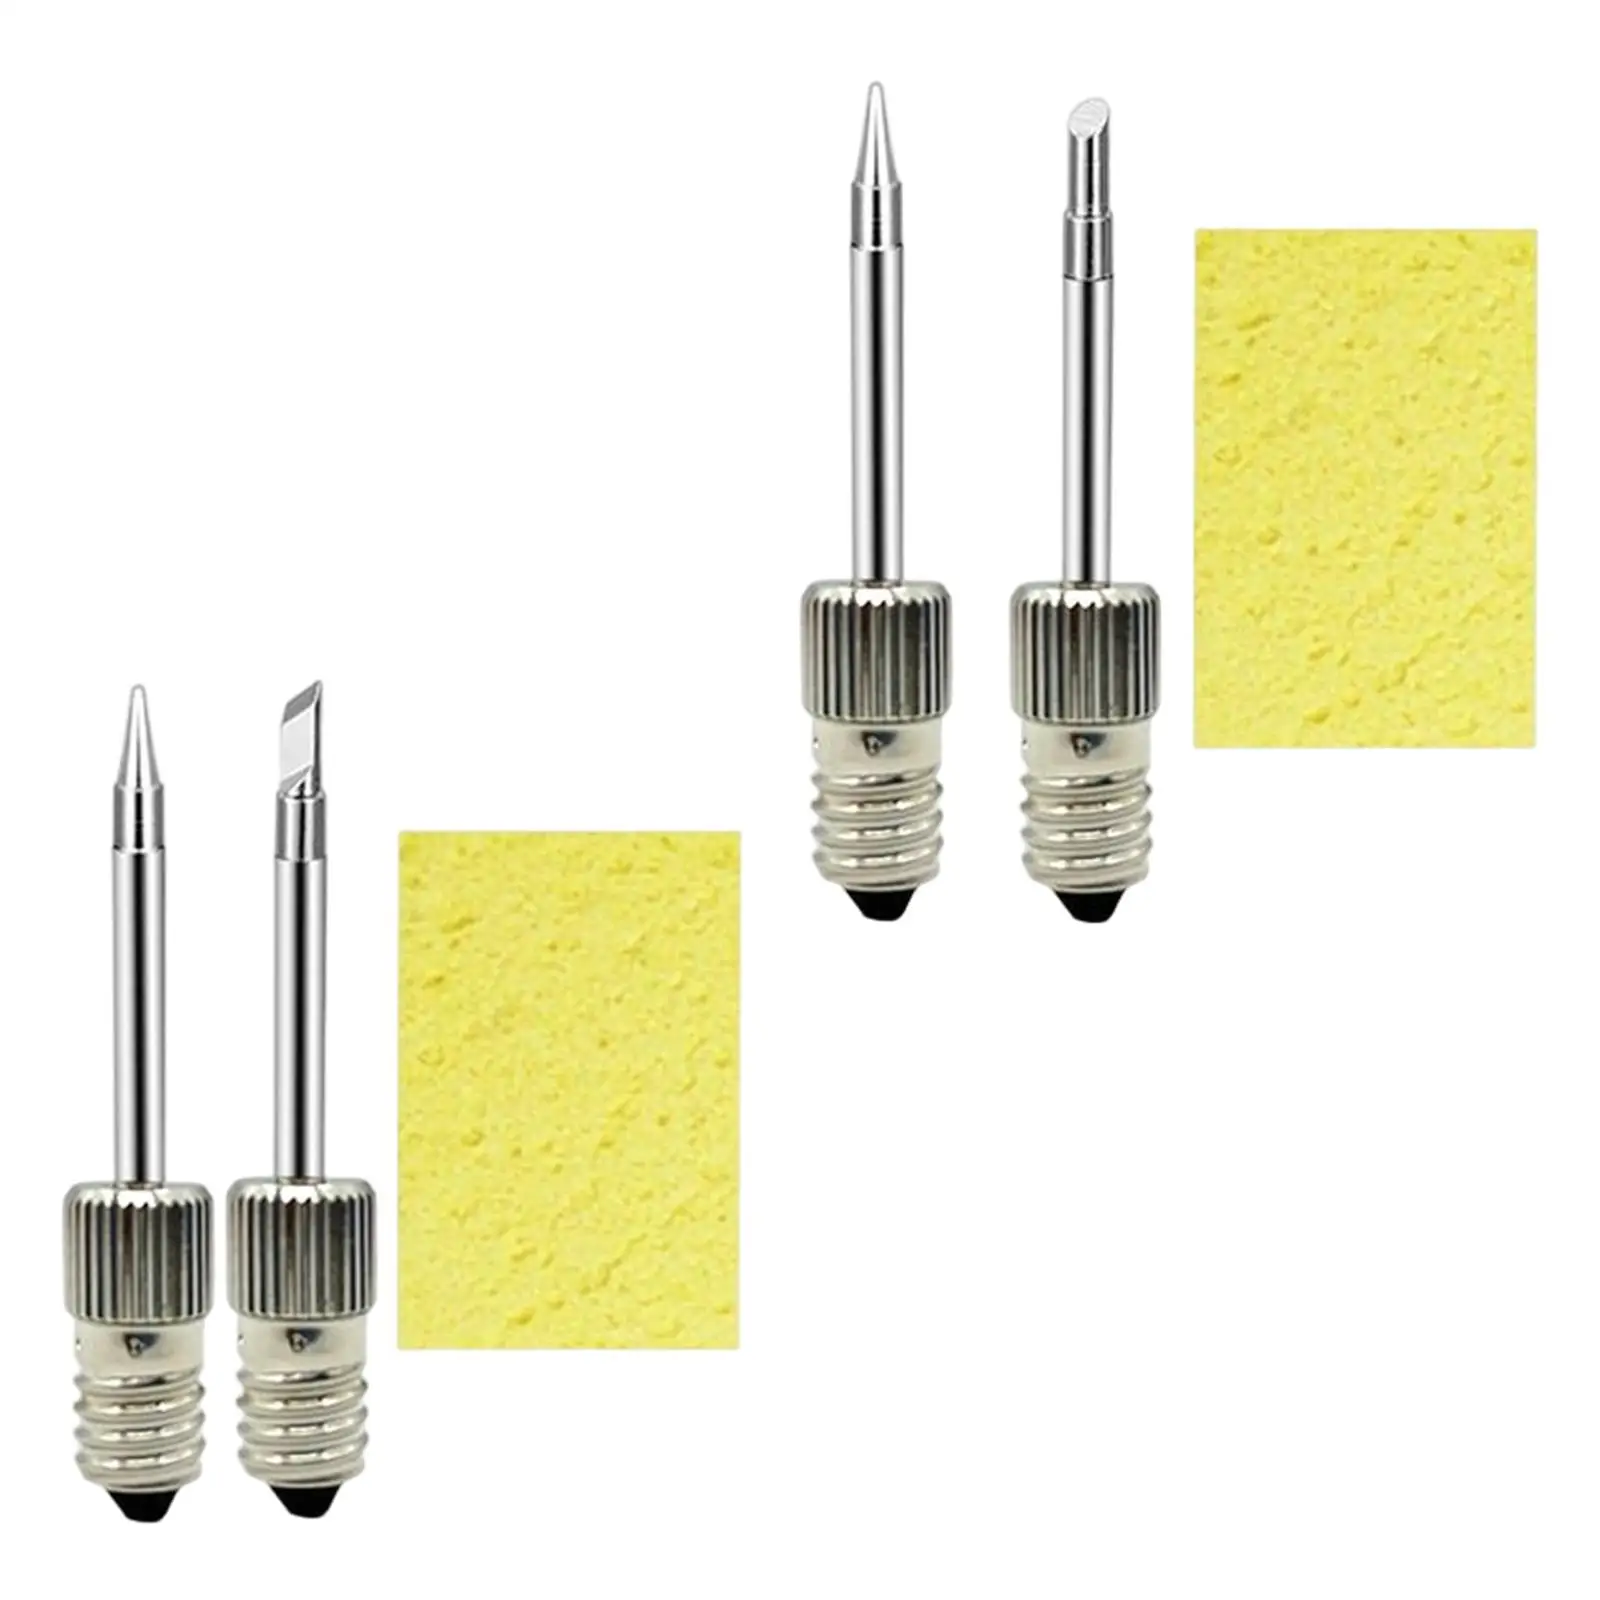 Copper Soldering Iron Tips Kit Soldering Iron Tips Accessories Parts Welding Soldering Tips for E10 Interface Soldering Station